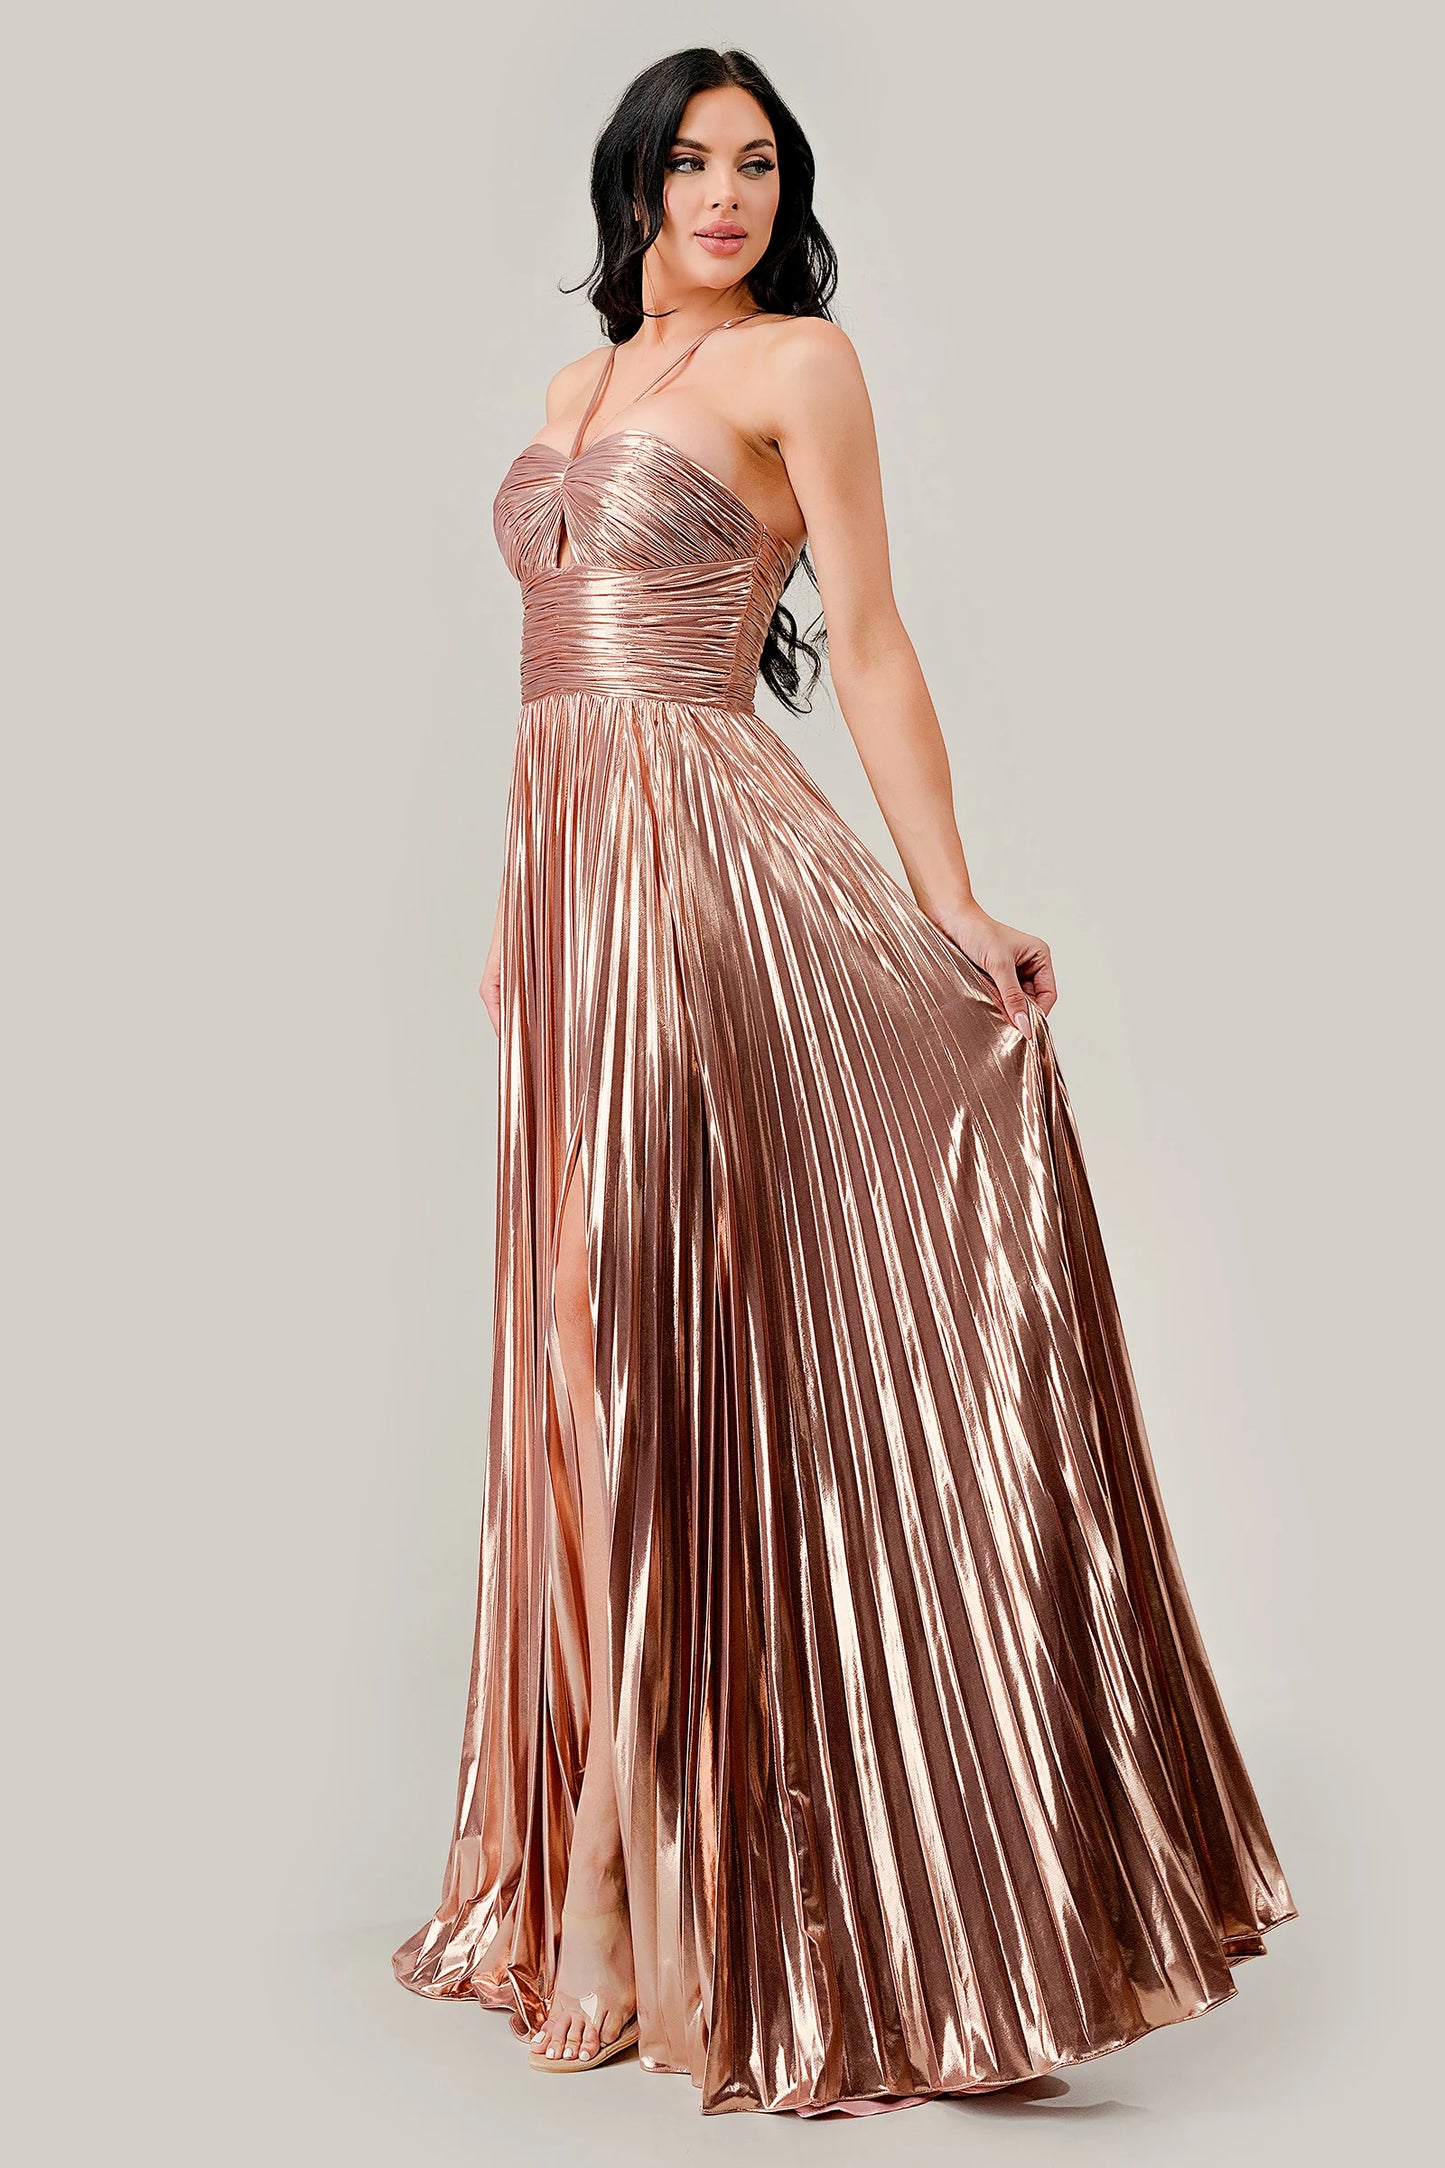 C153 Metallic Pleated A-Line Evening Dress - A stunning gown featuring metallic accents, pleated A-line silhouette, small bust keyhole cutout, gathered waistline, and sweetheart neckline for glamour and sophistication.